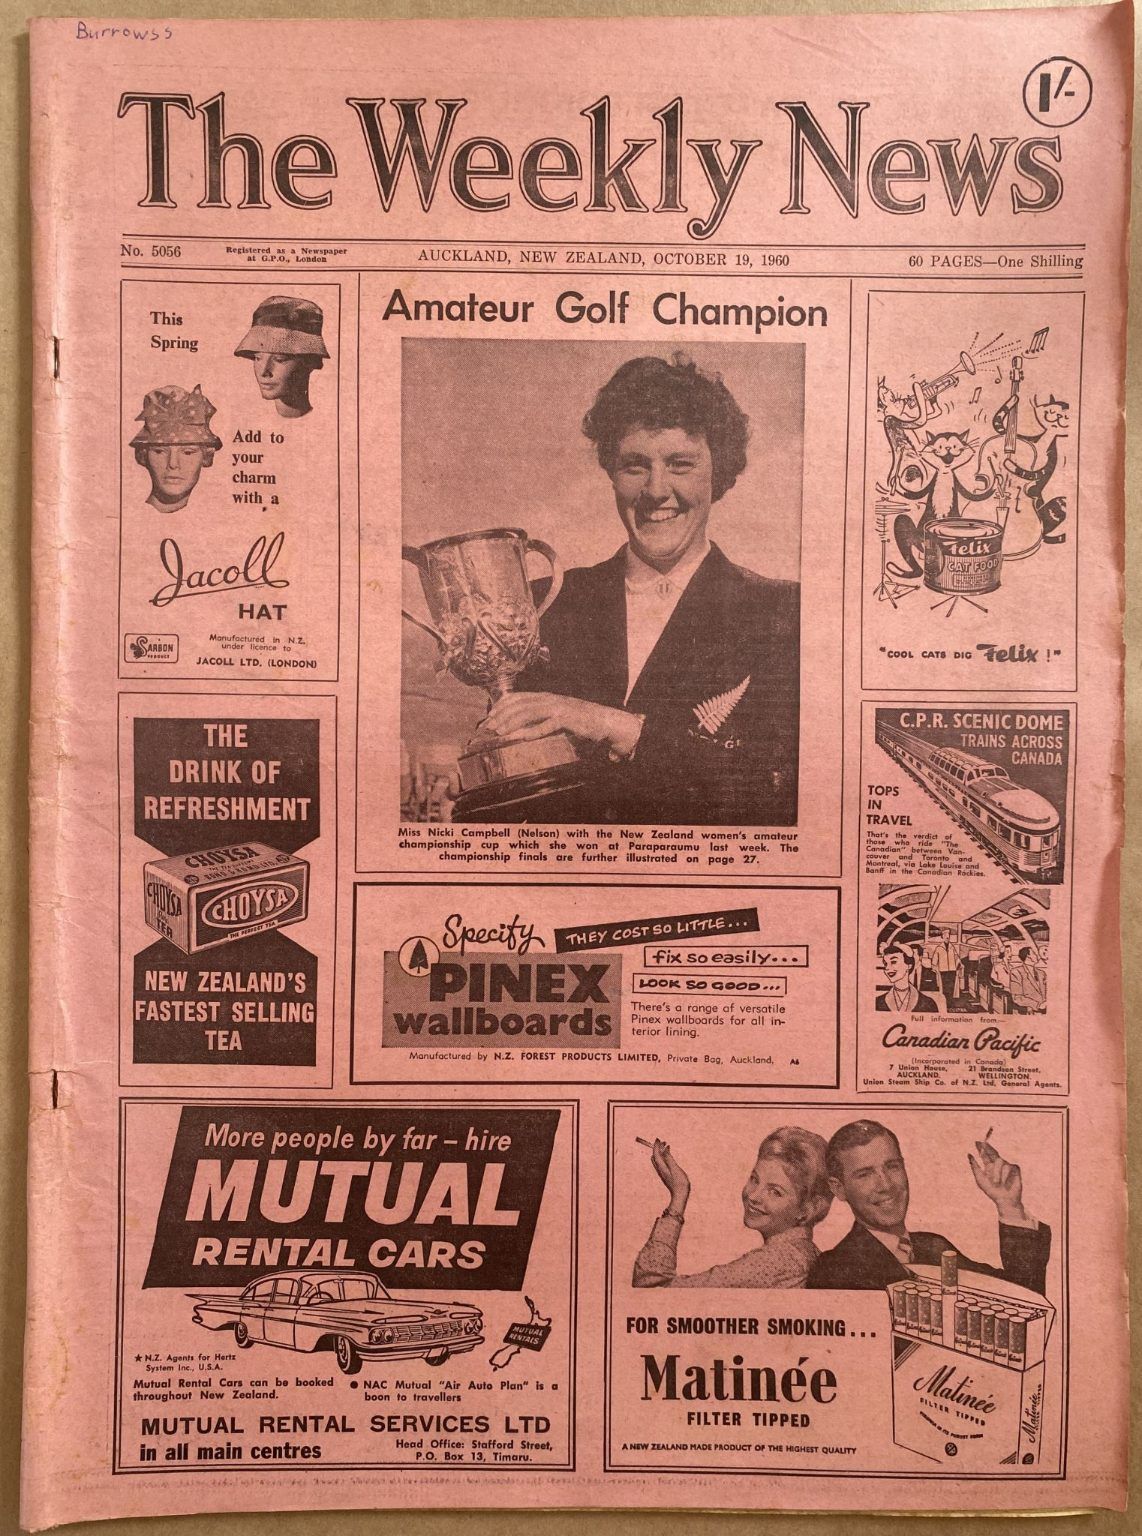 OLD NEWSPAPER: The Weekly News, No. 5056, 19 October 1960